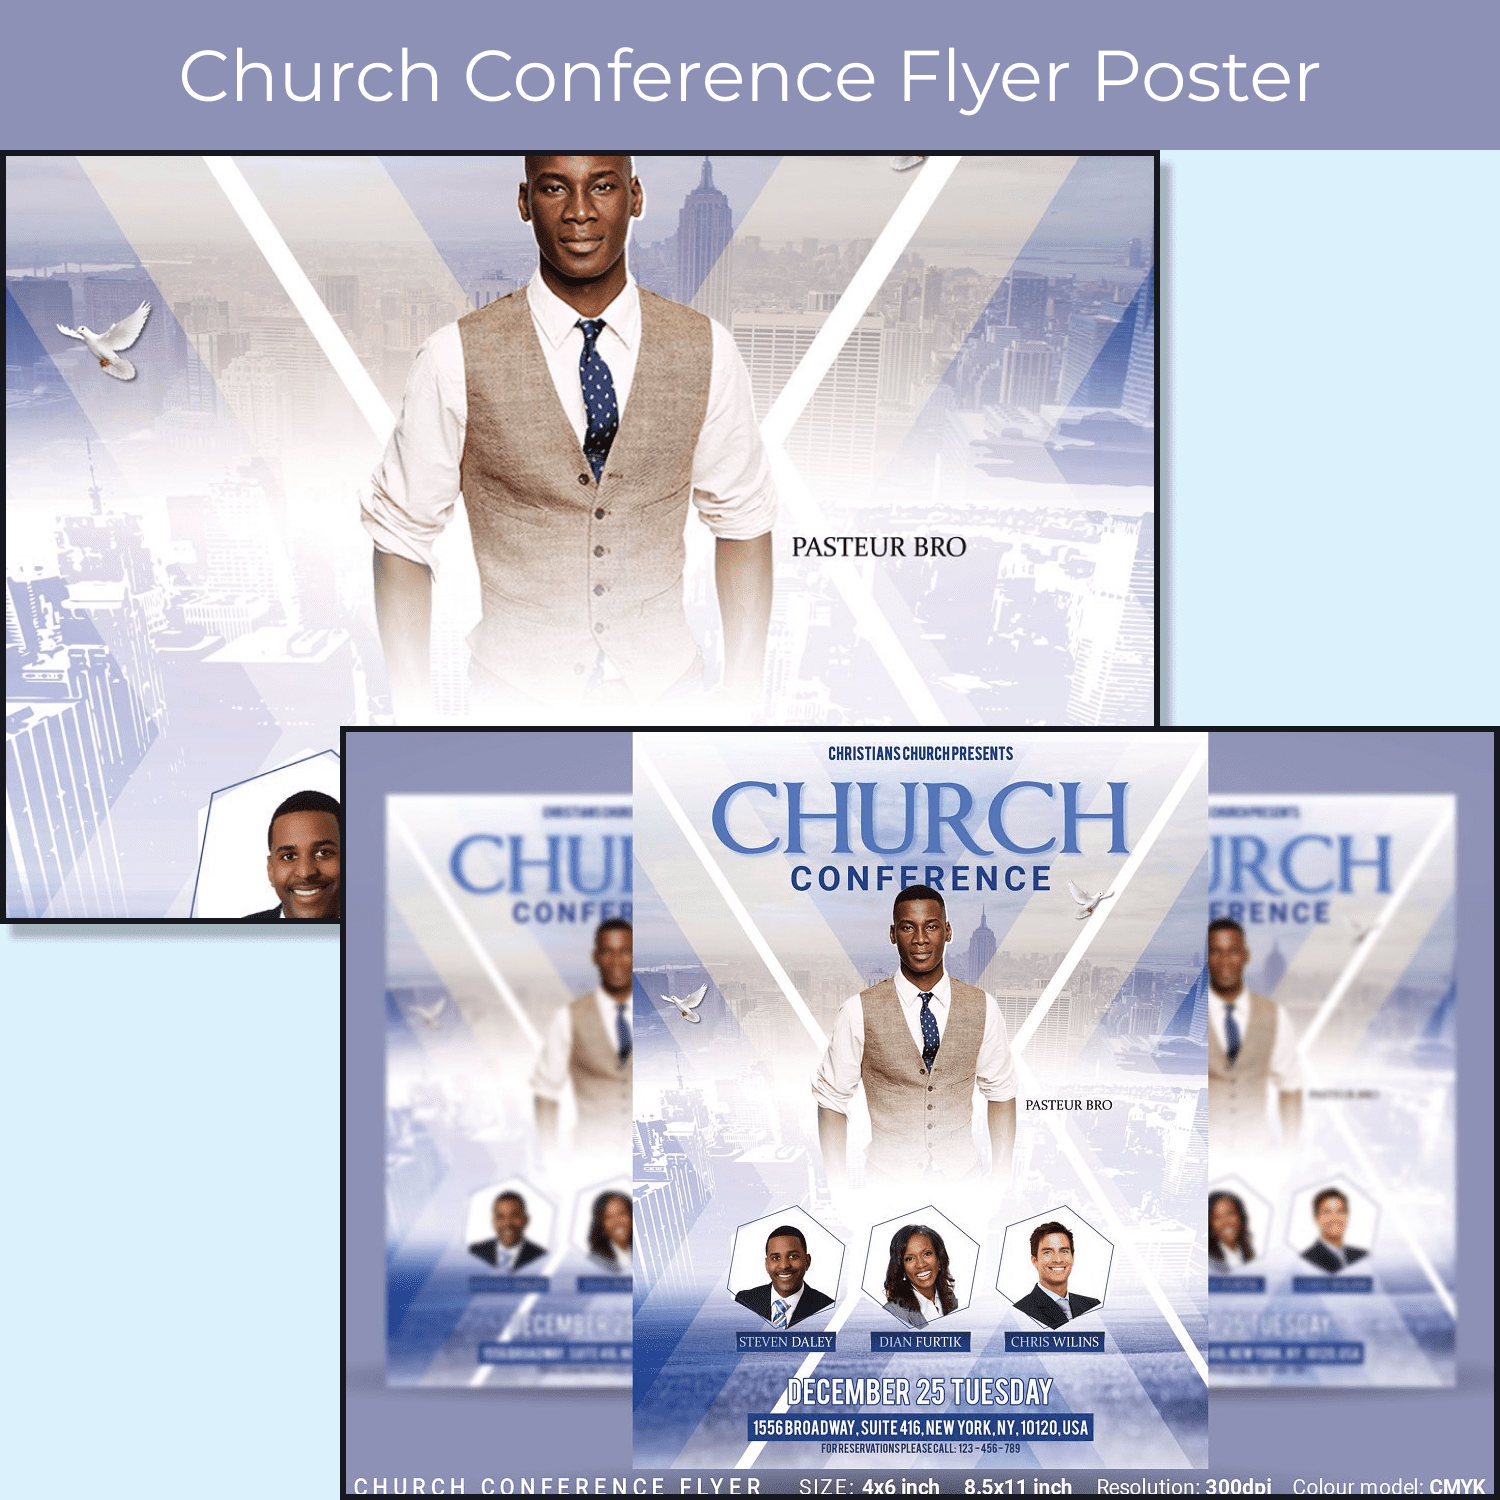 Church Conference Flyer Poster cover 1500x1500 1